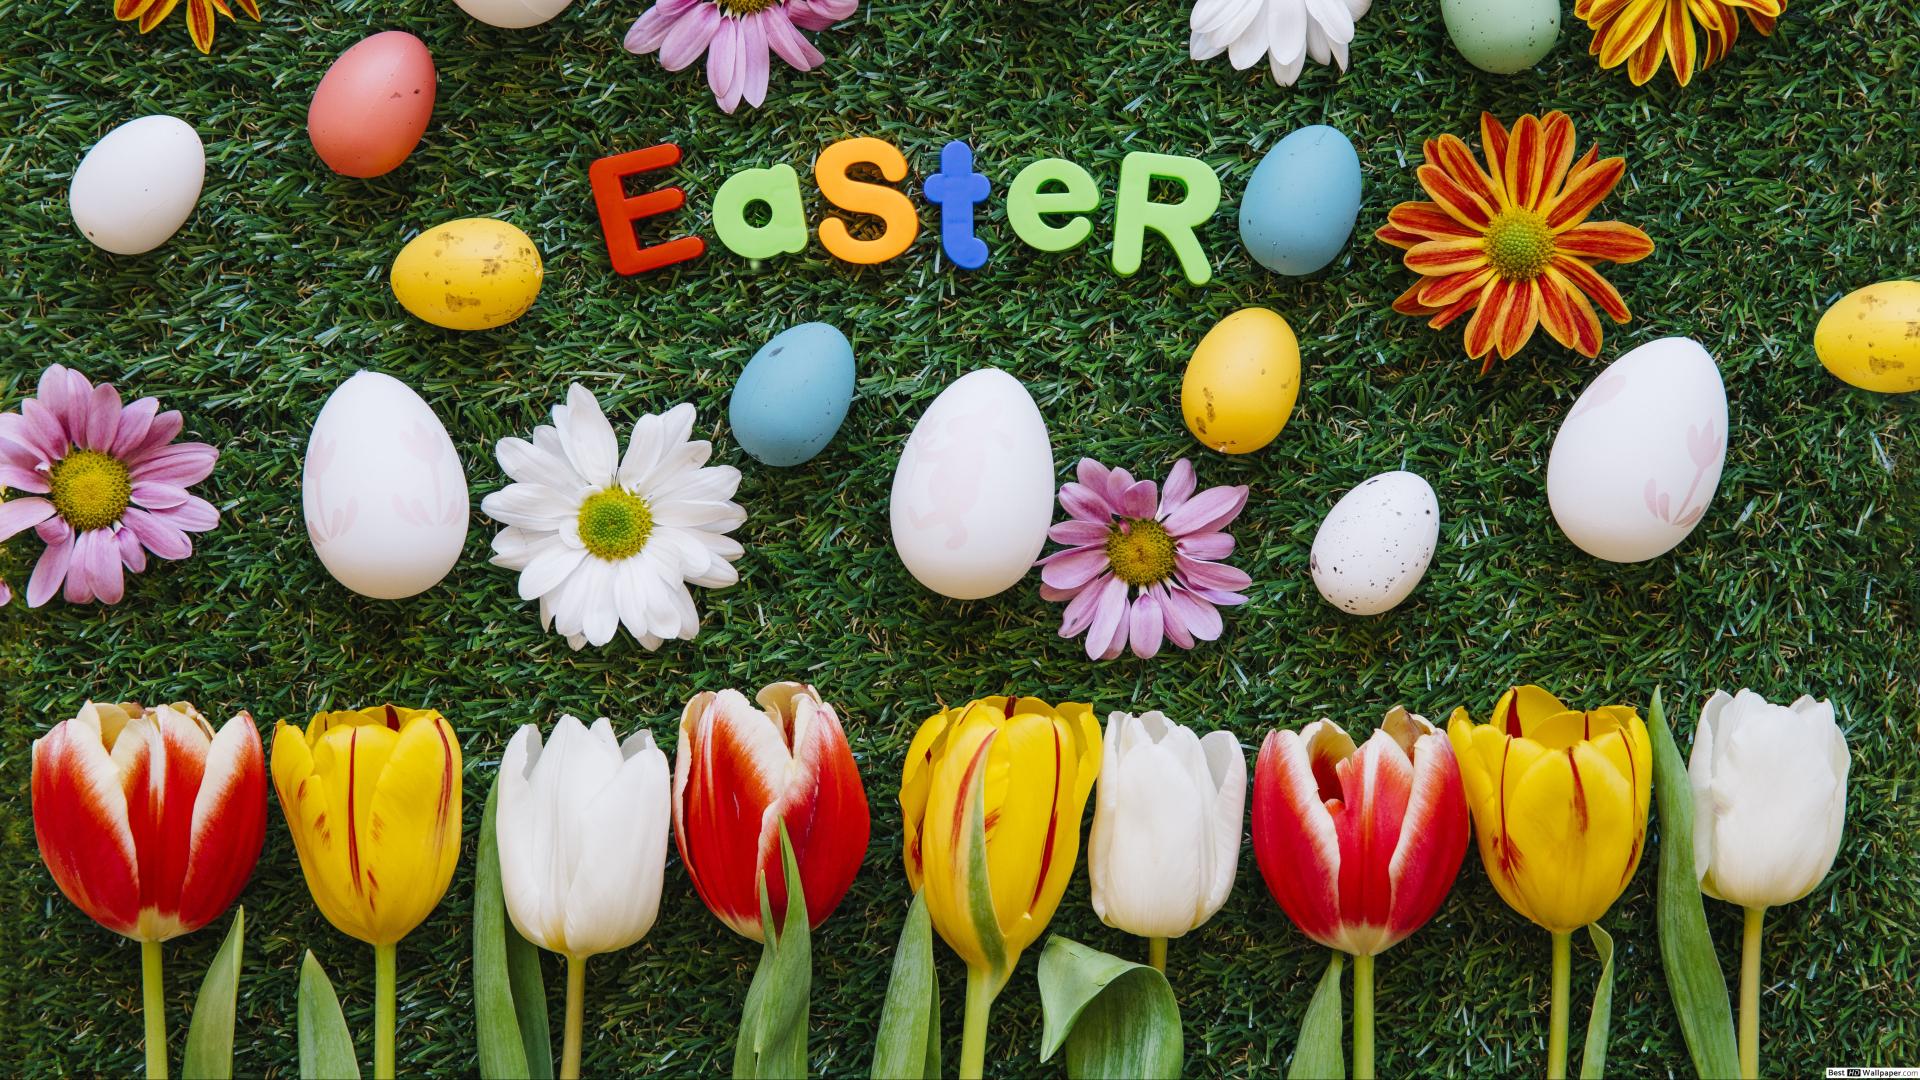 Easter wallpaper with multicolored Easter eggs and flowers HD wallpaper download